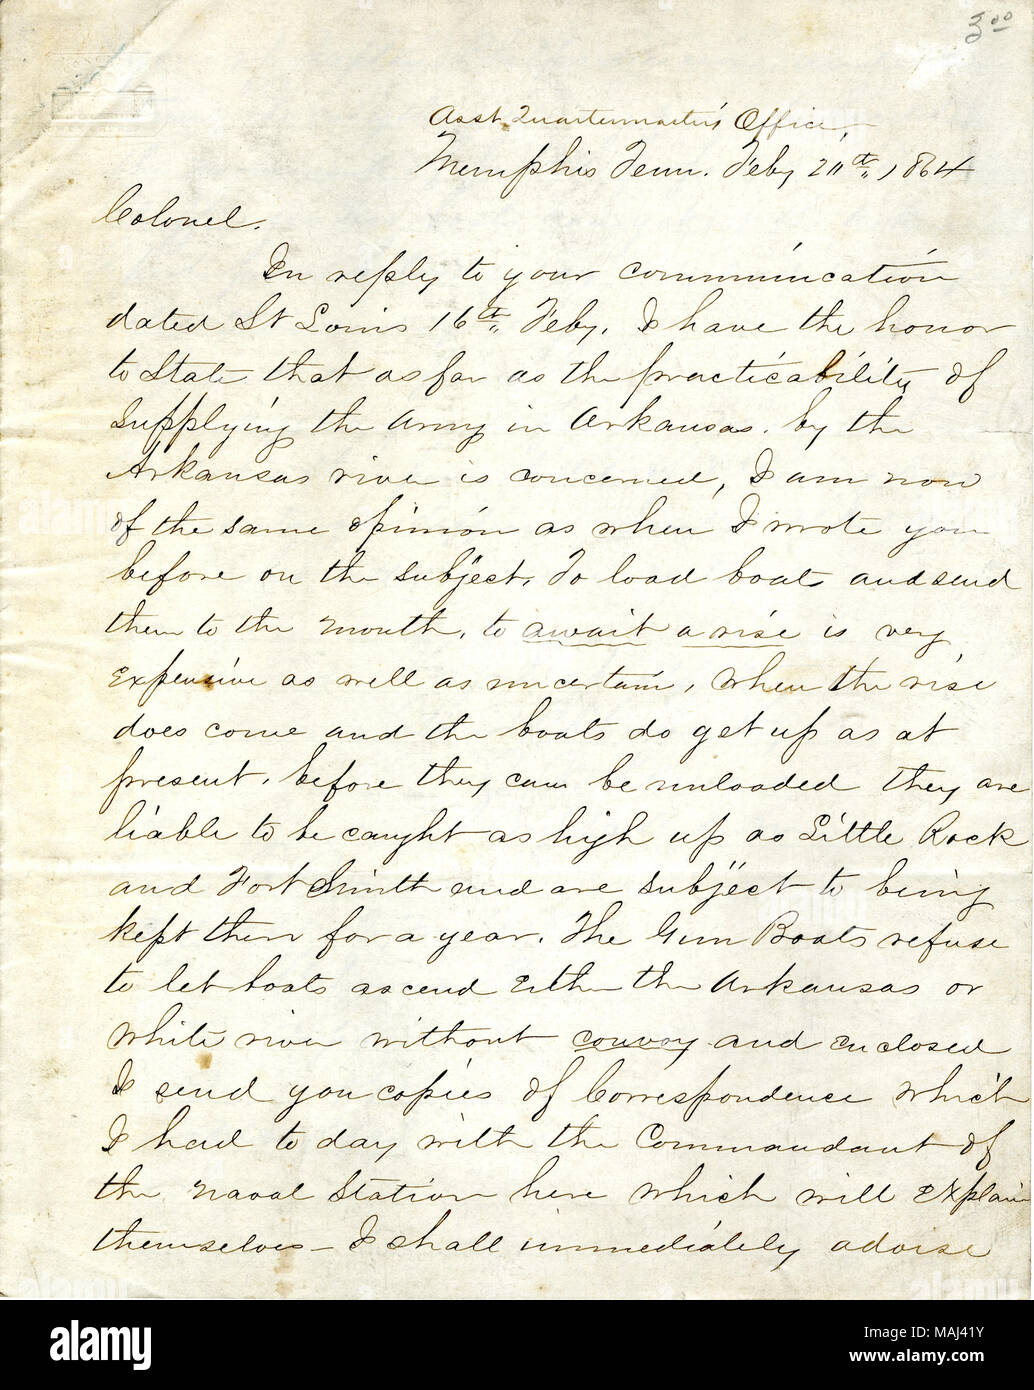 Letter from J.V. Lewis, Asst. Quartermaster’s Office, Memphis, Tenn., to Colonel Lewis B. Parsons, St. Louis, Mo., discussing the practicality of supplying the army in Arkansas by the Arkansas River, page one, 1864-02-26. Civil War Collection, Missouri History Museum, St. Louis, Missouri. Stock Photo